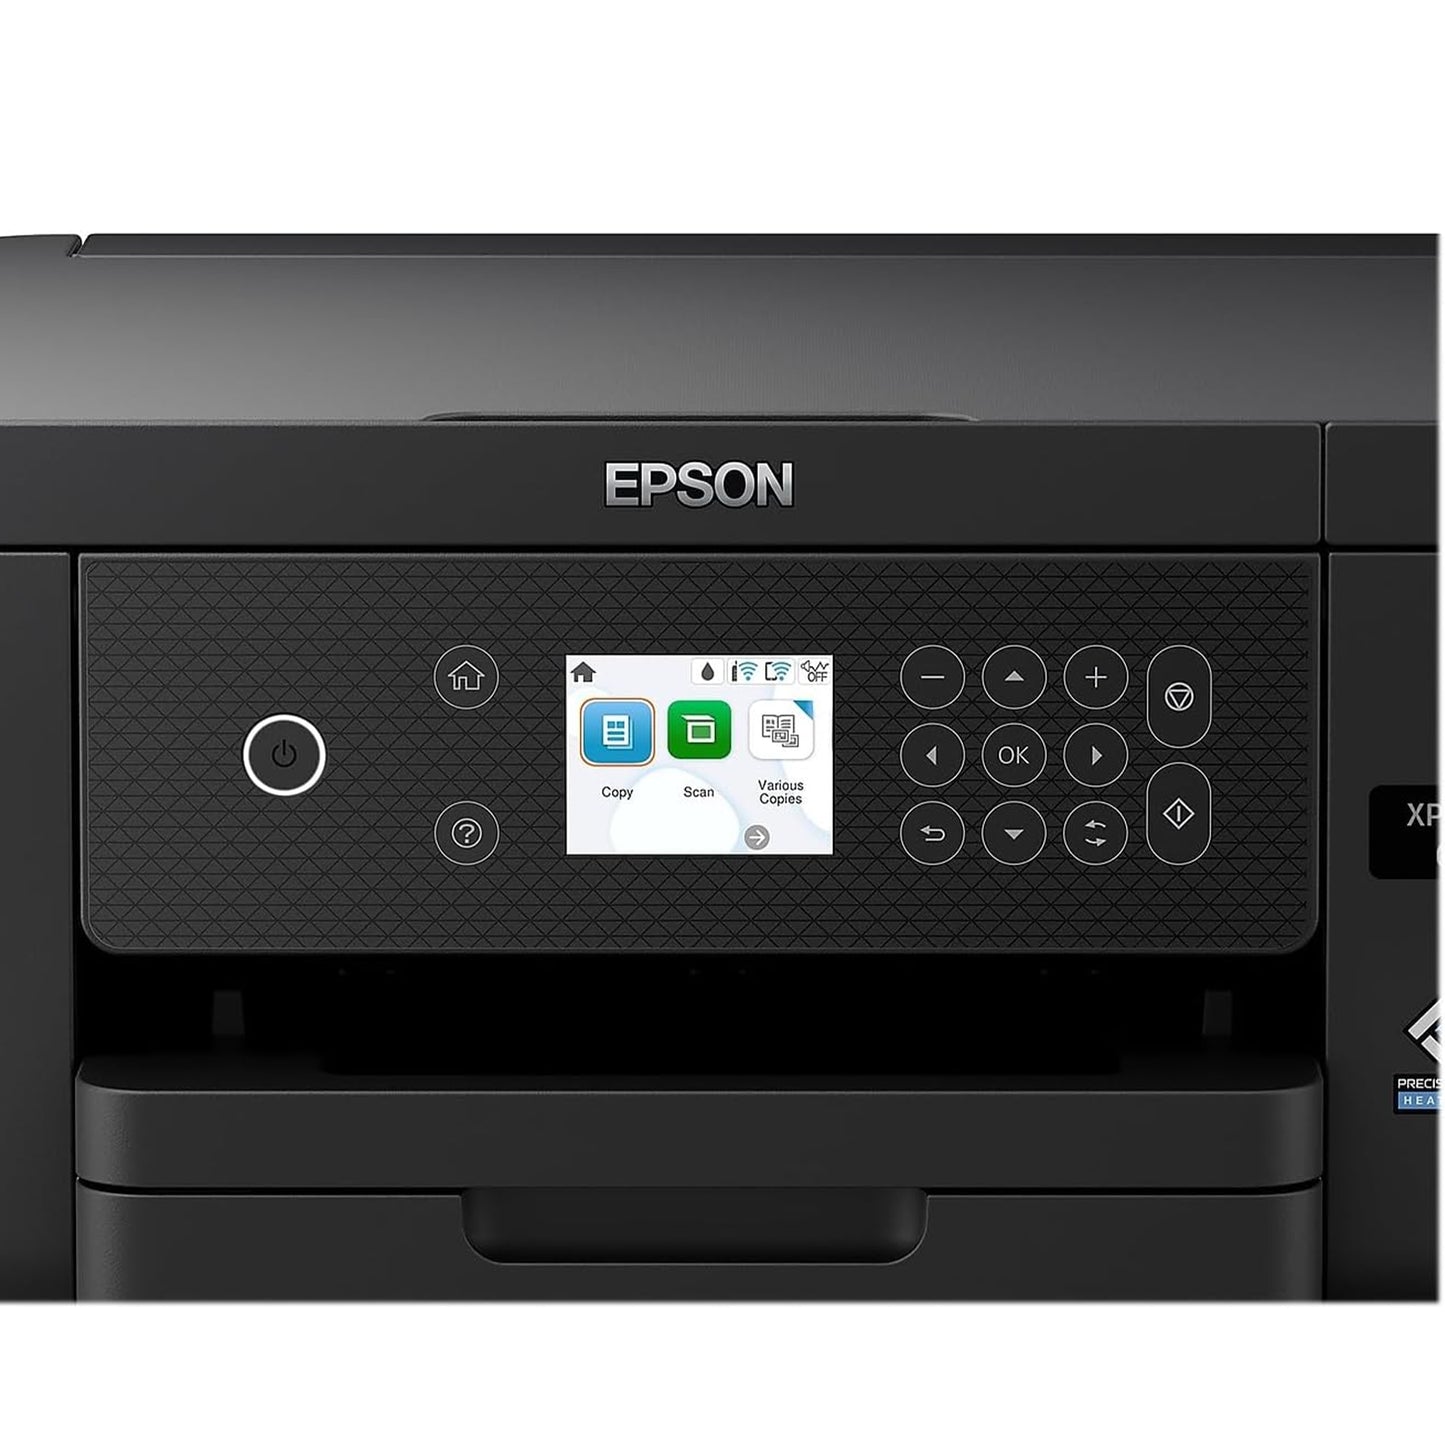 Epson Expression Home XP-5200 Wireless Color All-in-One Printer with Scan, Copy, Automatic 2-Sided Printing, Borderless Photos, 150-Sheet Paper Tray and 2.4" Color Display,Black